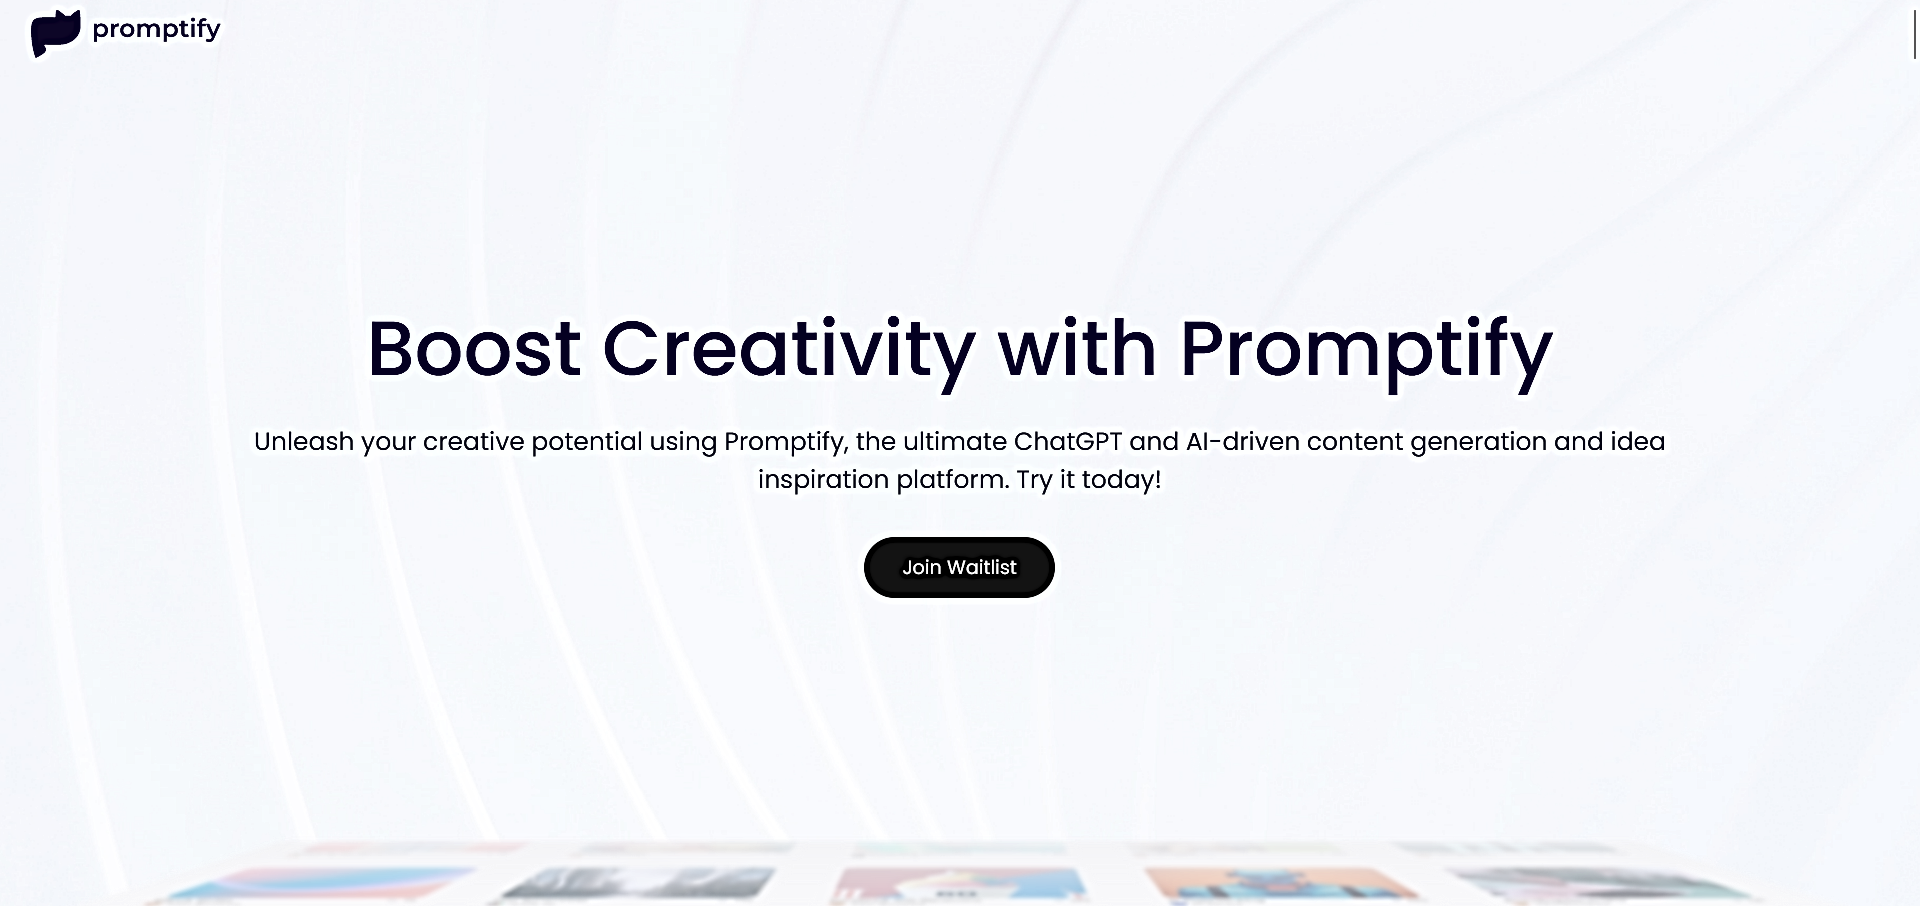 Promptify featured